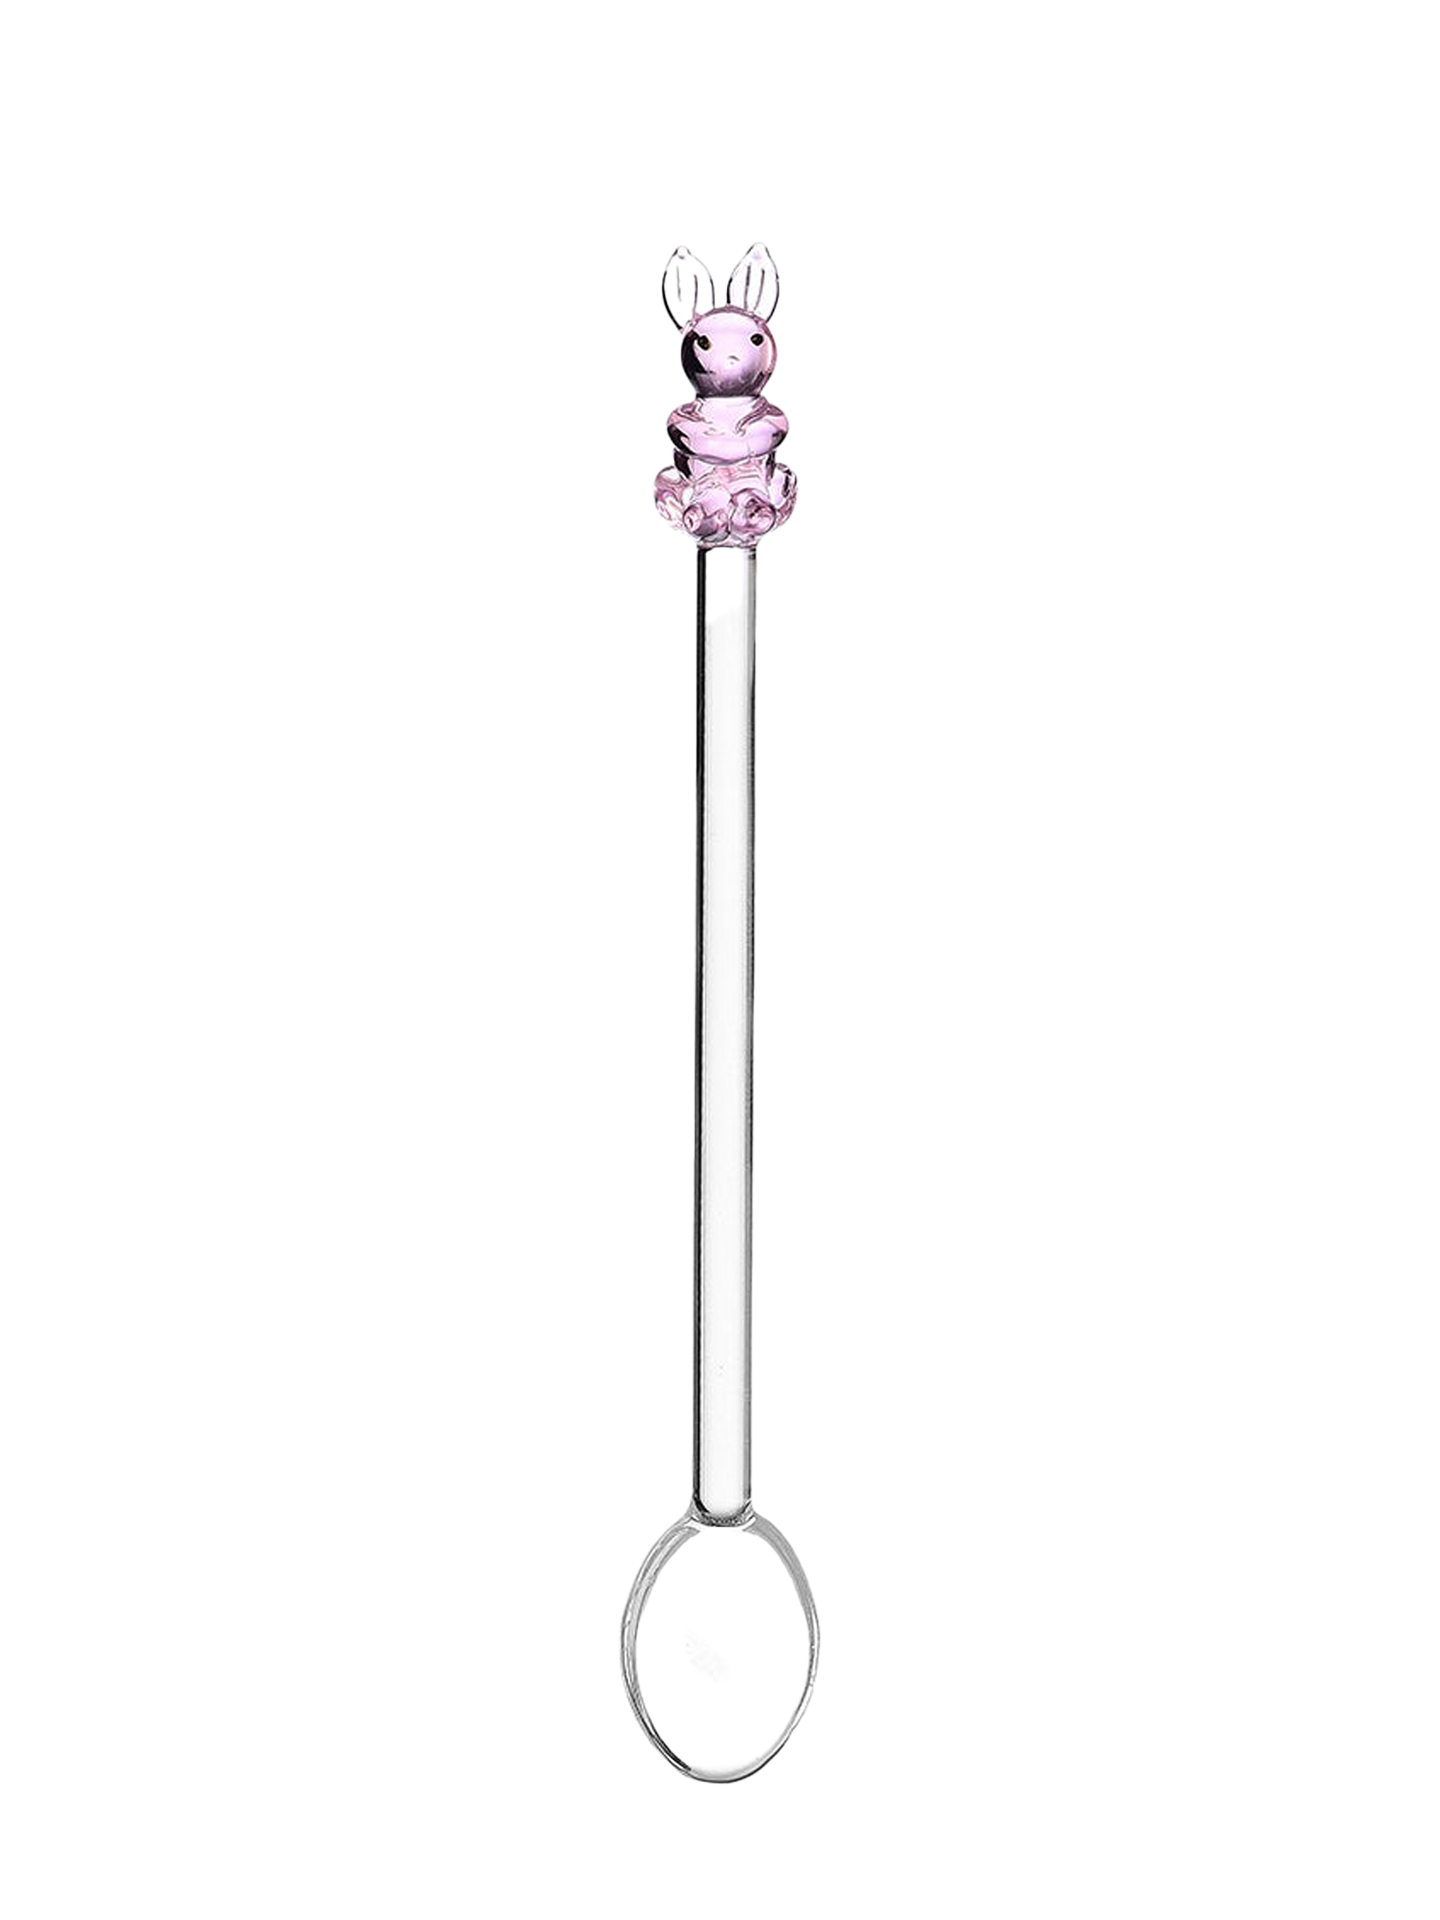 Bunny Glass Spoon from Animal Farm Collection